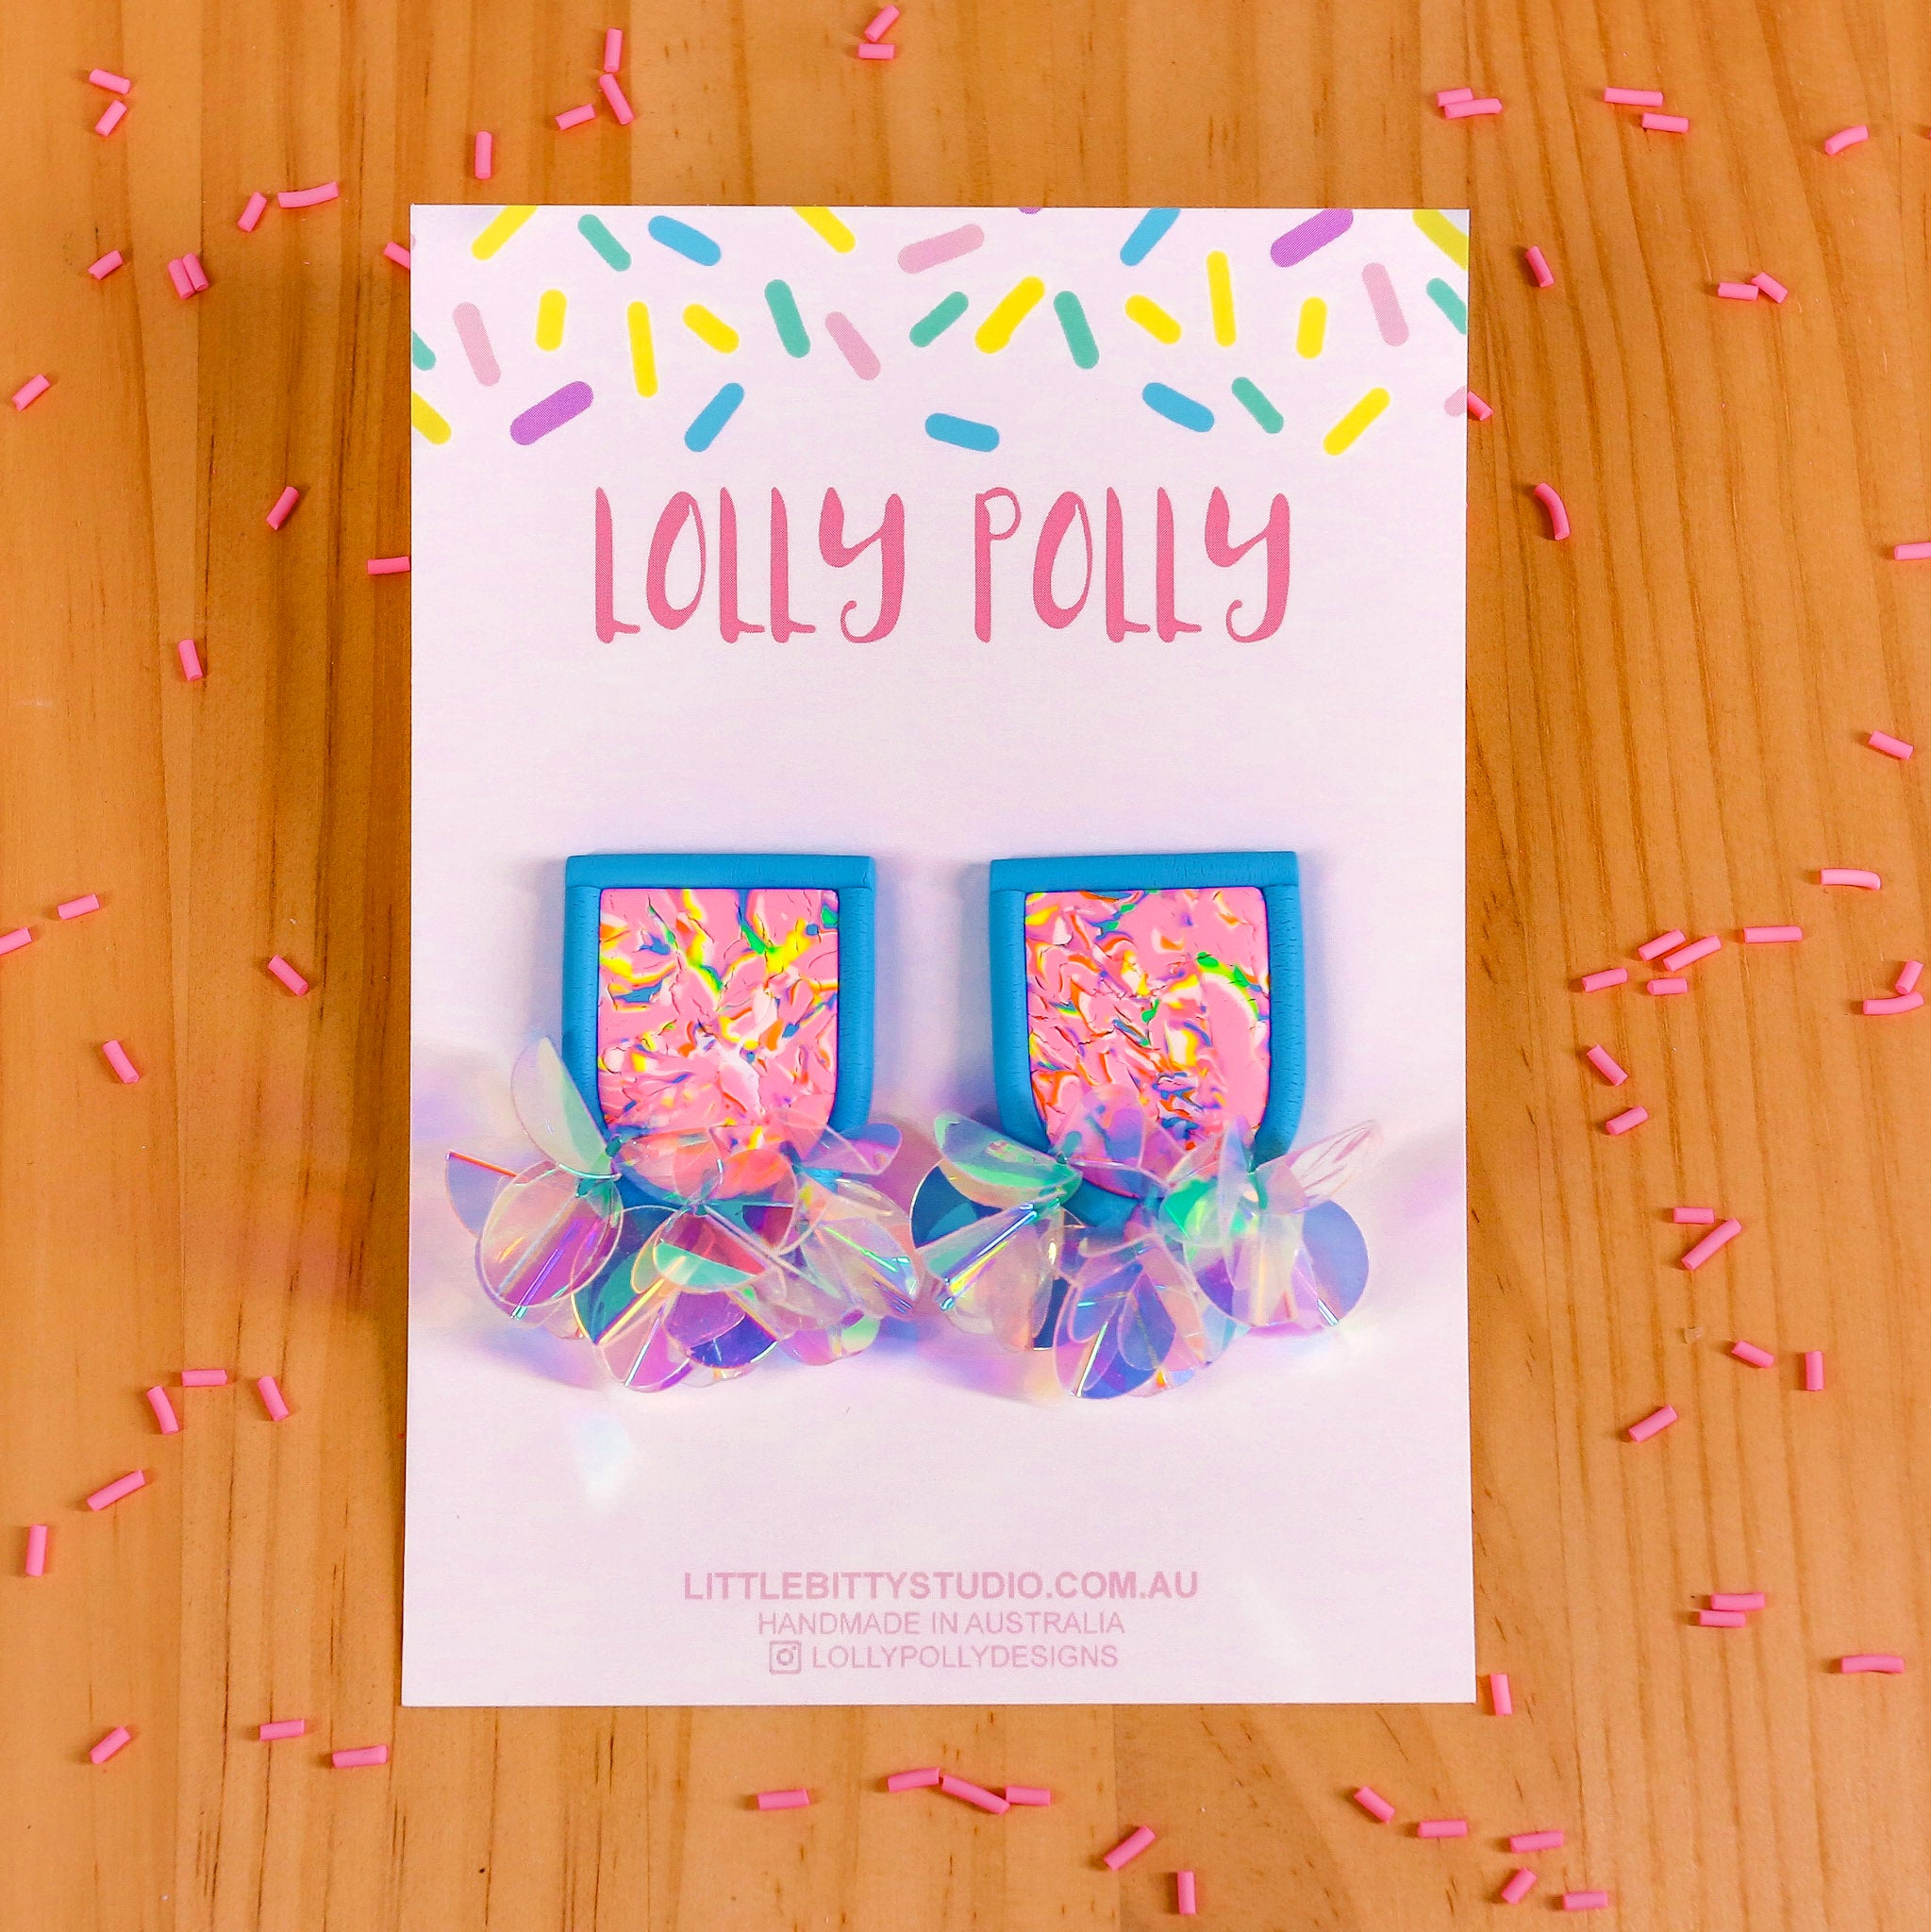 Lolly Polly | Party Studs - Blue and Pink – Thousand Island Dressing